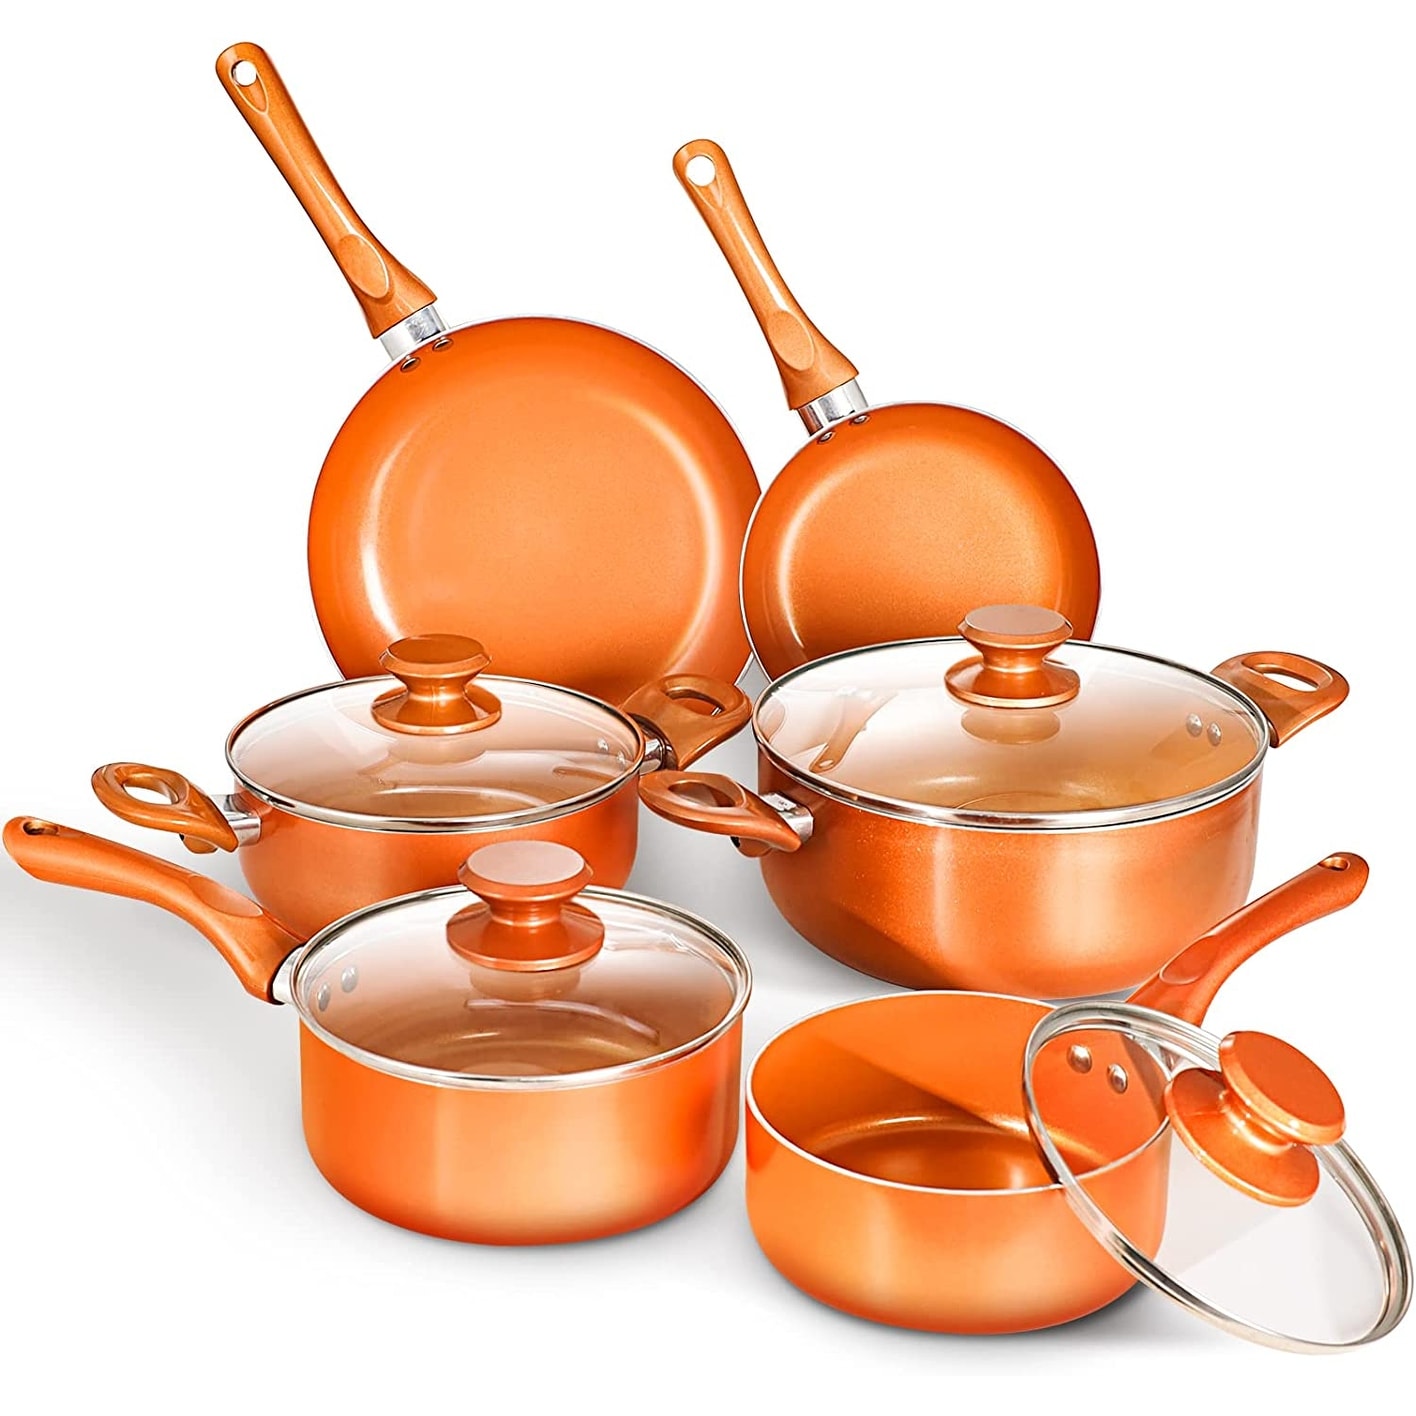 6-piece Non-stick Cookware Set Pots and Pans Set for Cooking - Ceramic  Coating Saucepan, Stock Pot with Lid, Frying Pan, Copper - Bed Bath &  Beyond - 37523256